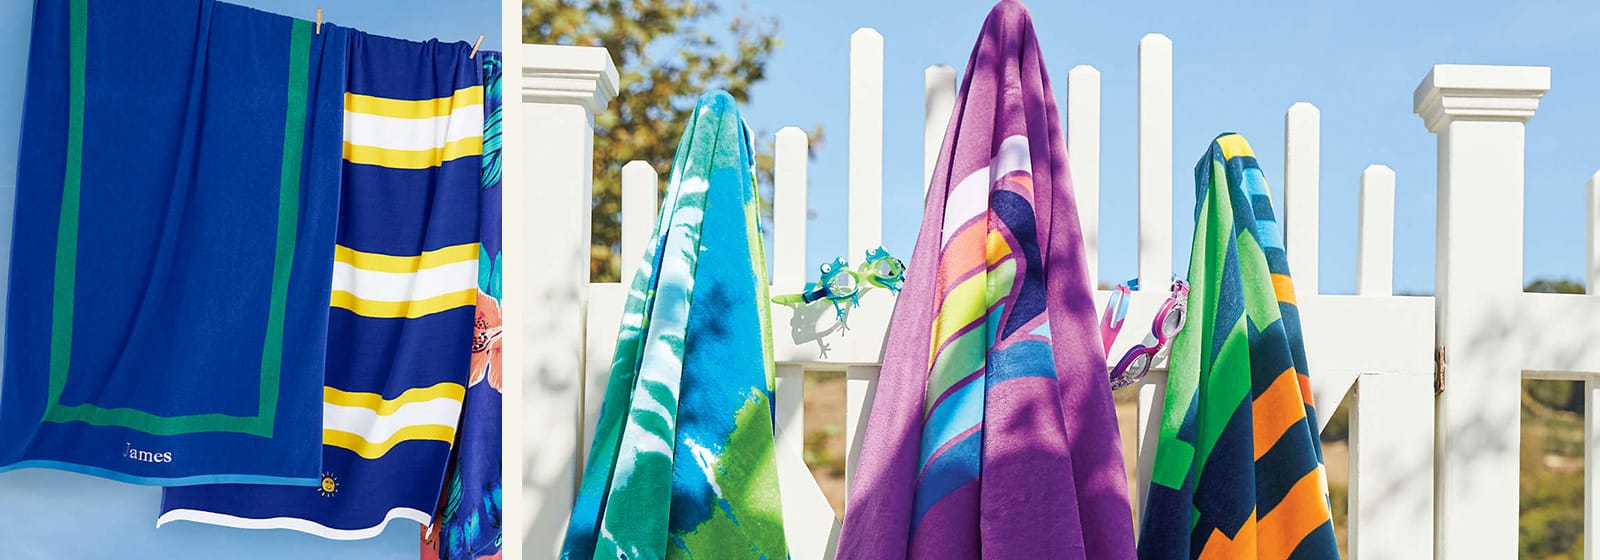 Everything You Need to Know About Beach Towels | Lands' End